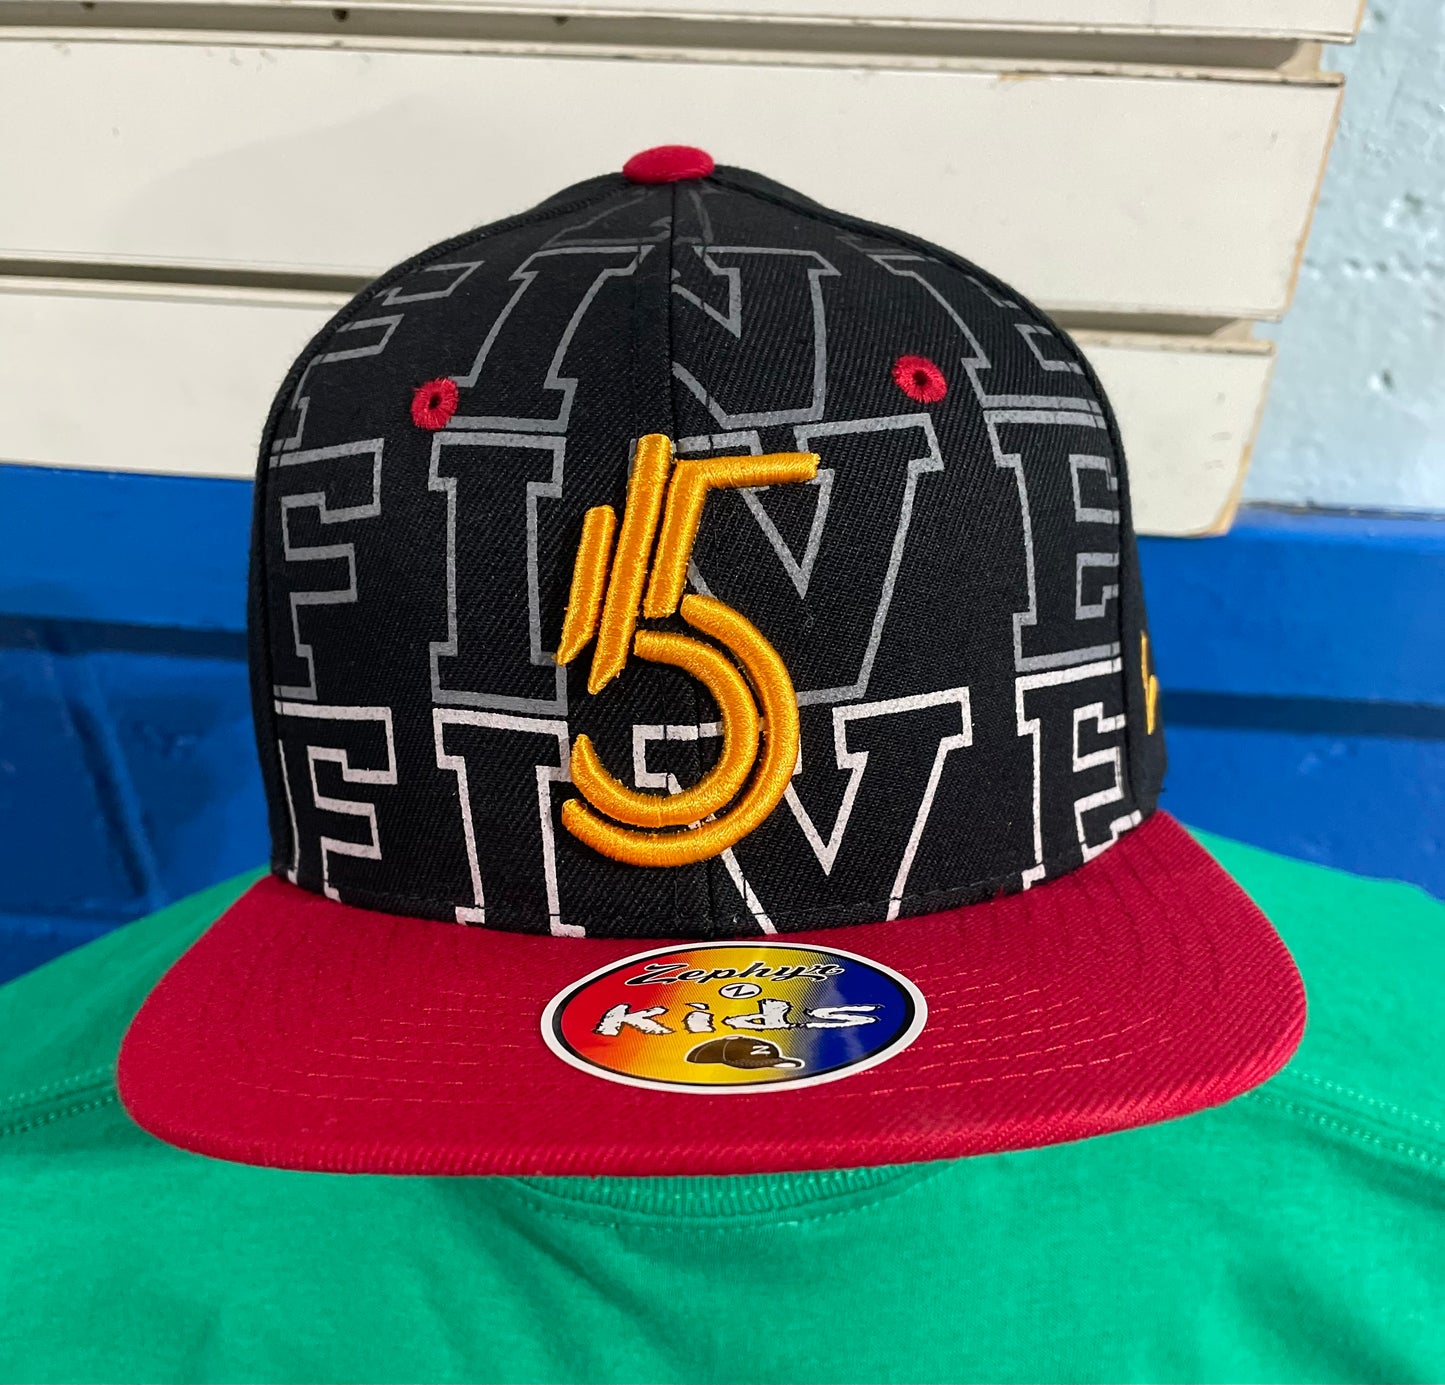 Five Youth Foreground Hat